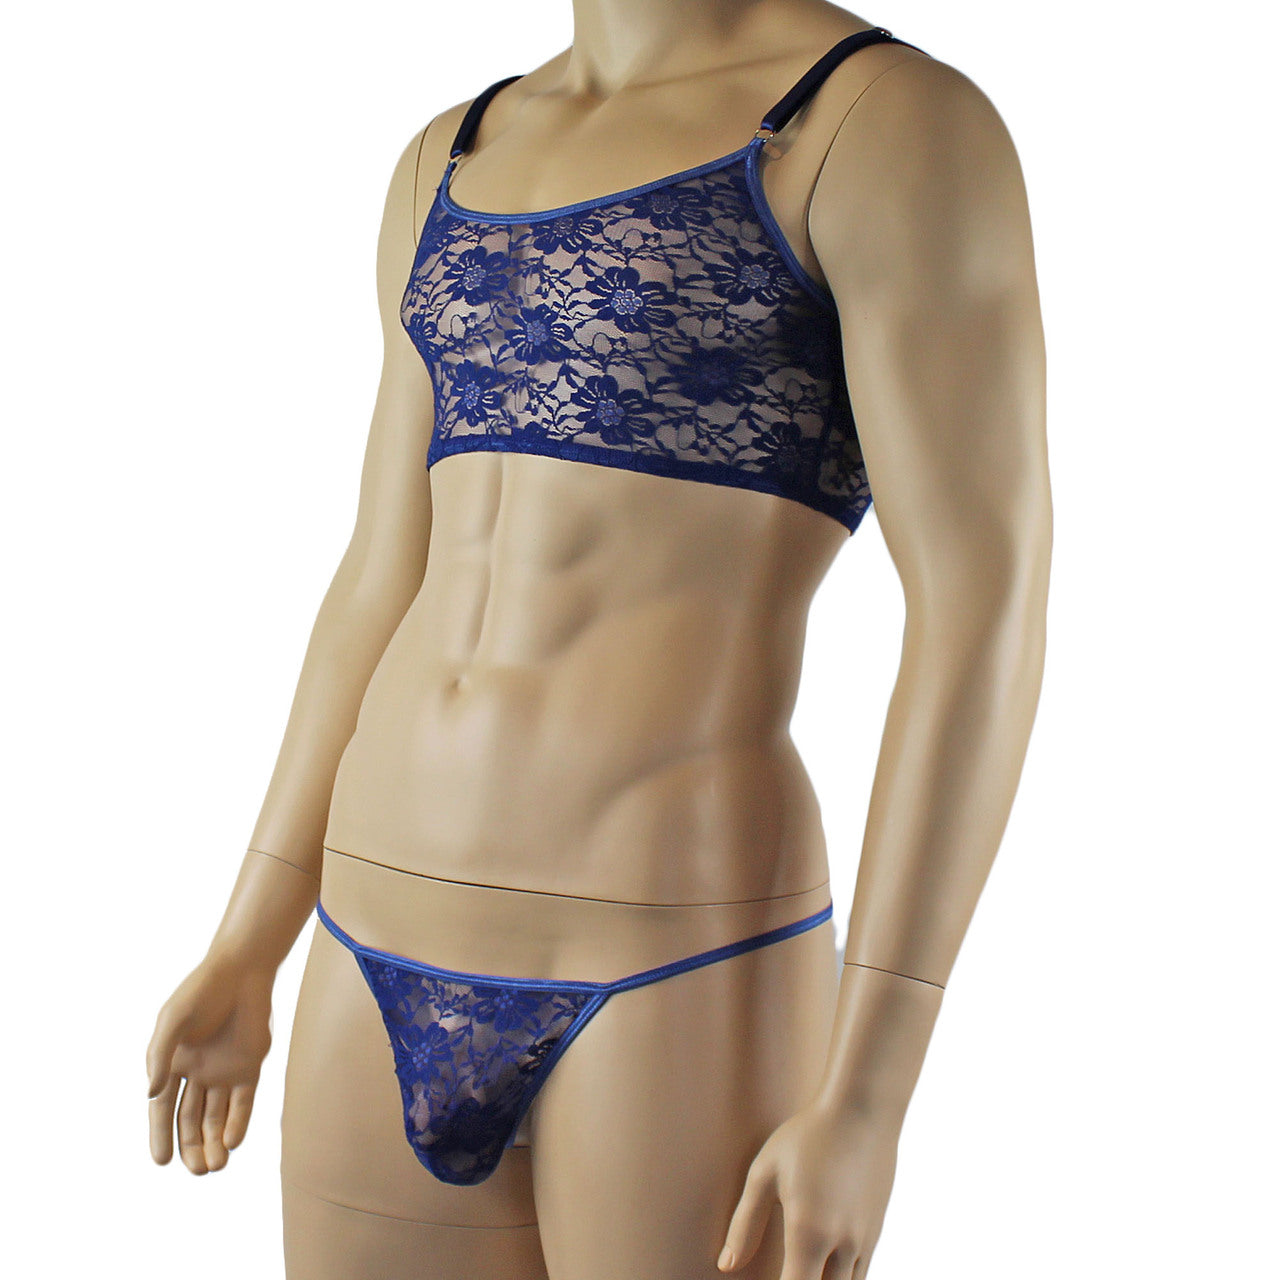 Mens Lace Crop Bra Top Camisole and G string Male Lingerie (navy plus other colours)